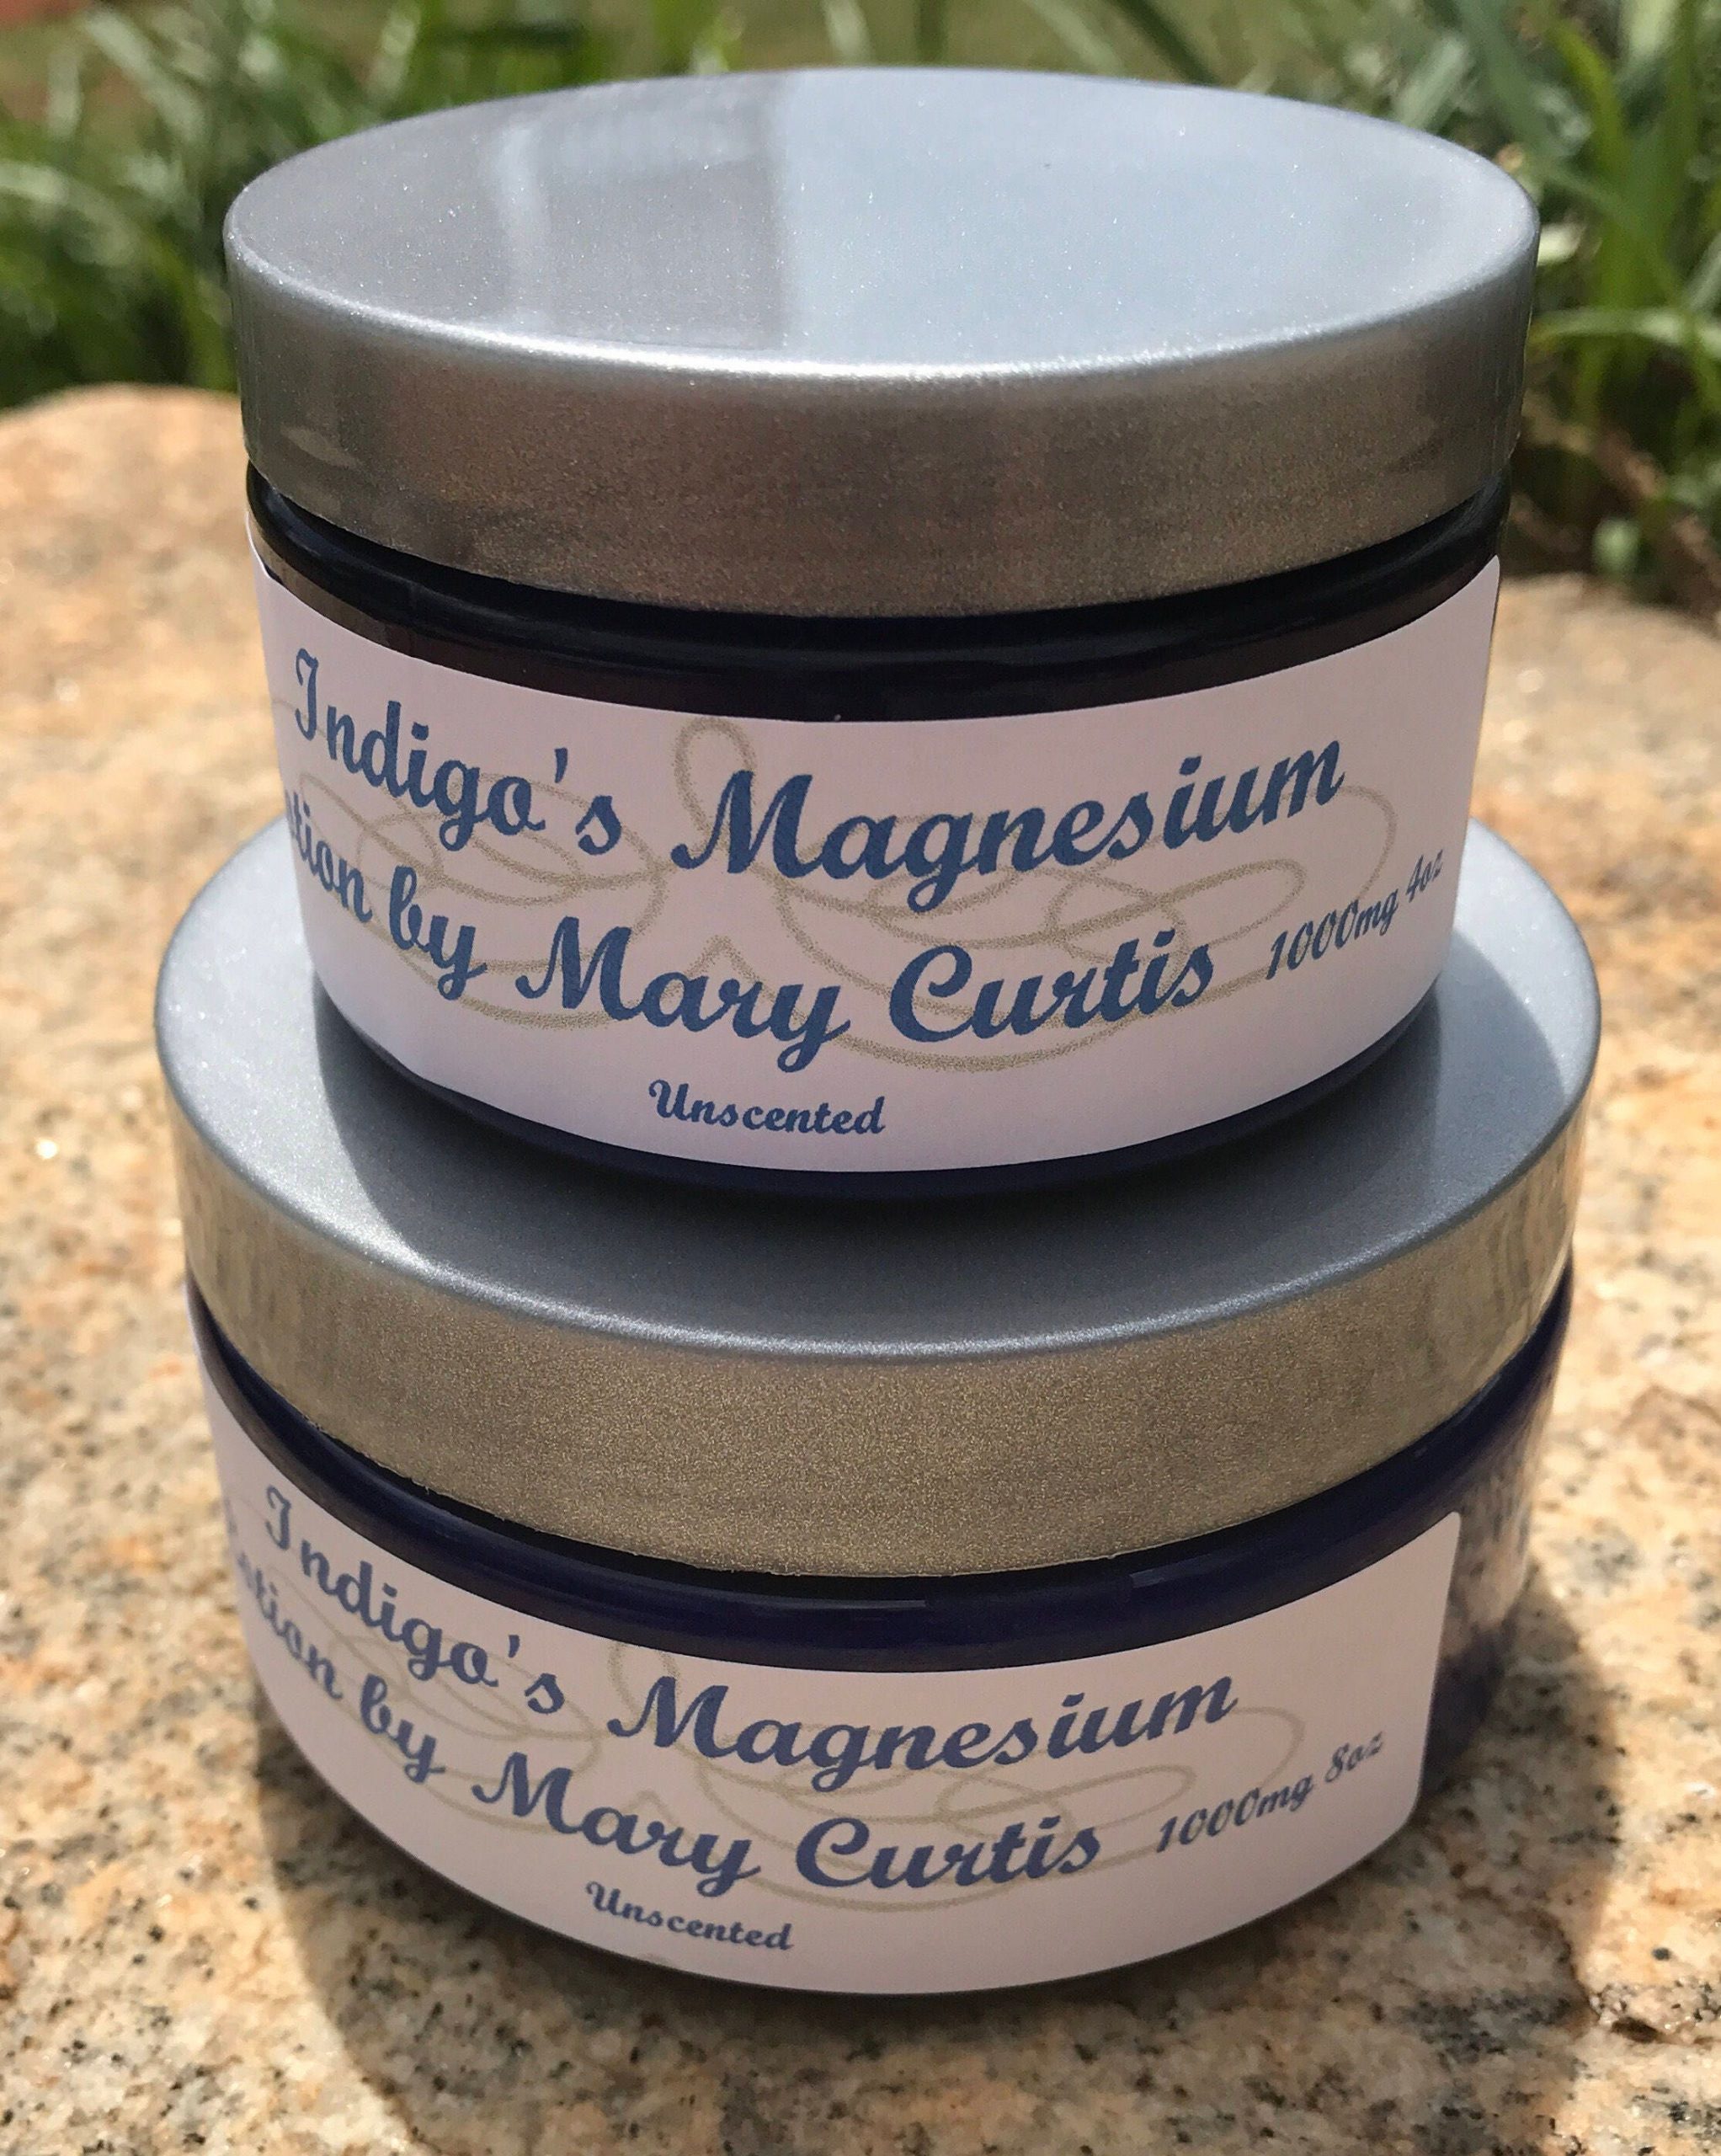 Unscented,1000mg Magnesium Body Lotion, Magnesium Body ...